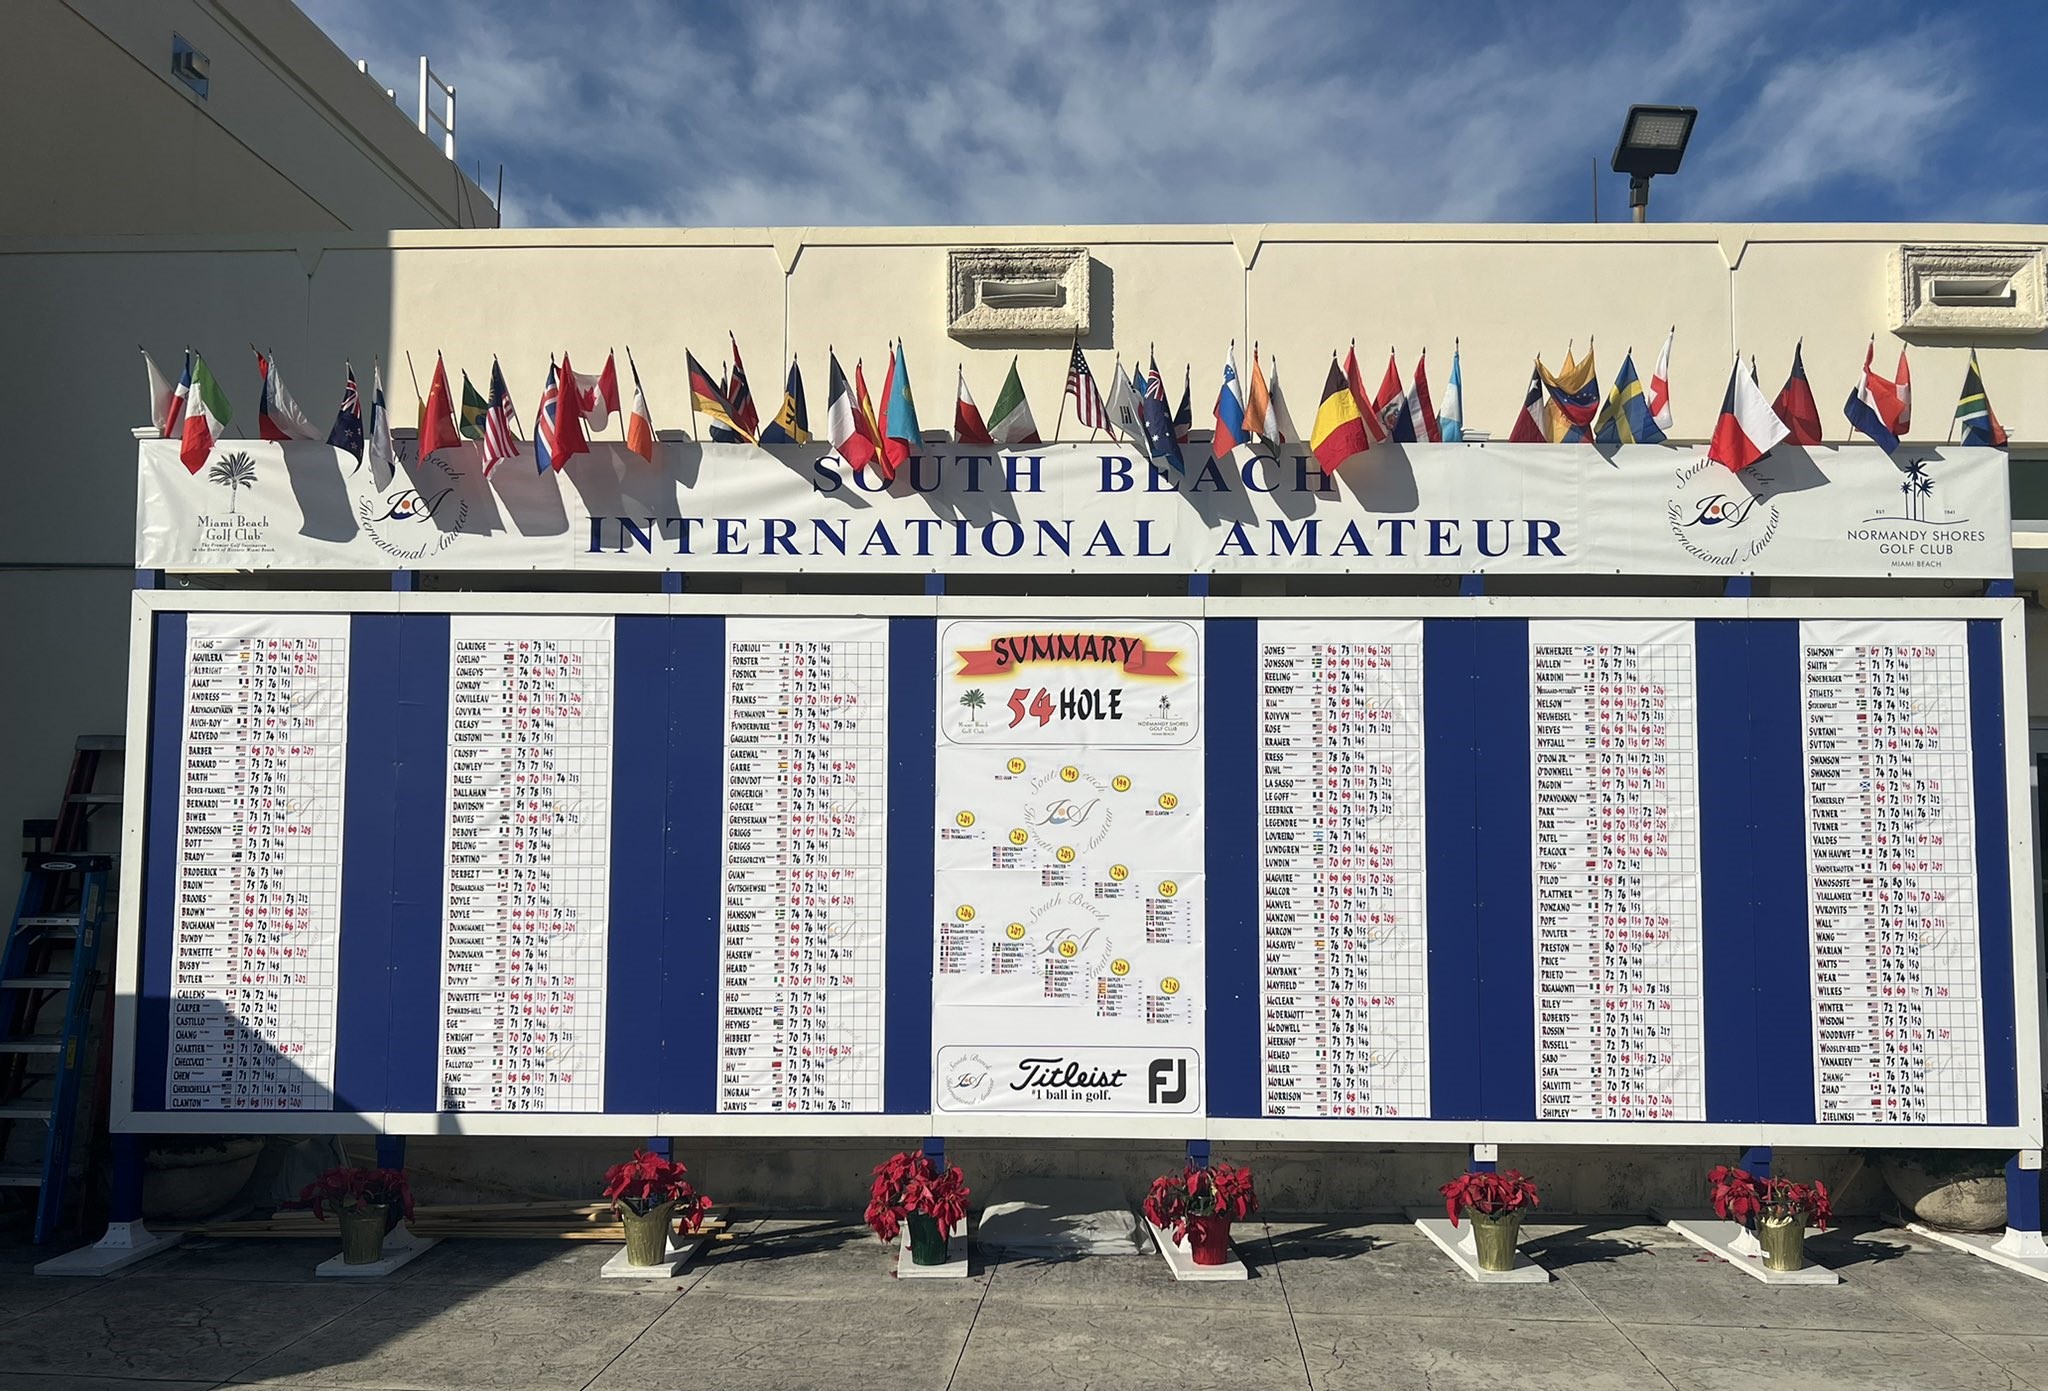 Upcoming: South Beach International Amateur; Open Competition for